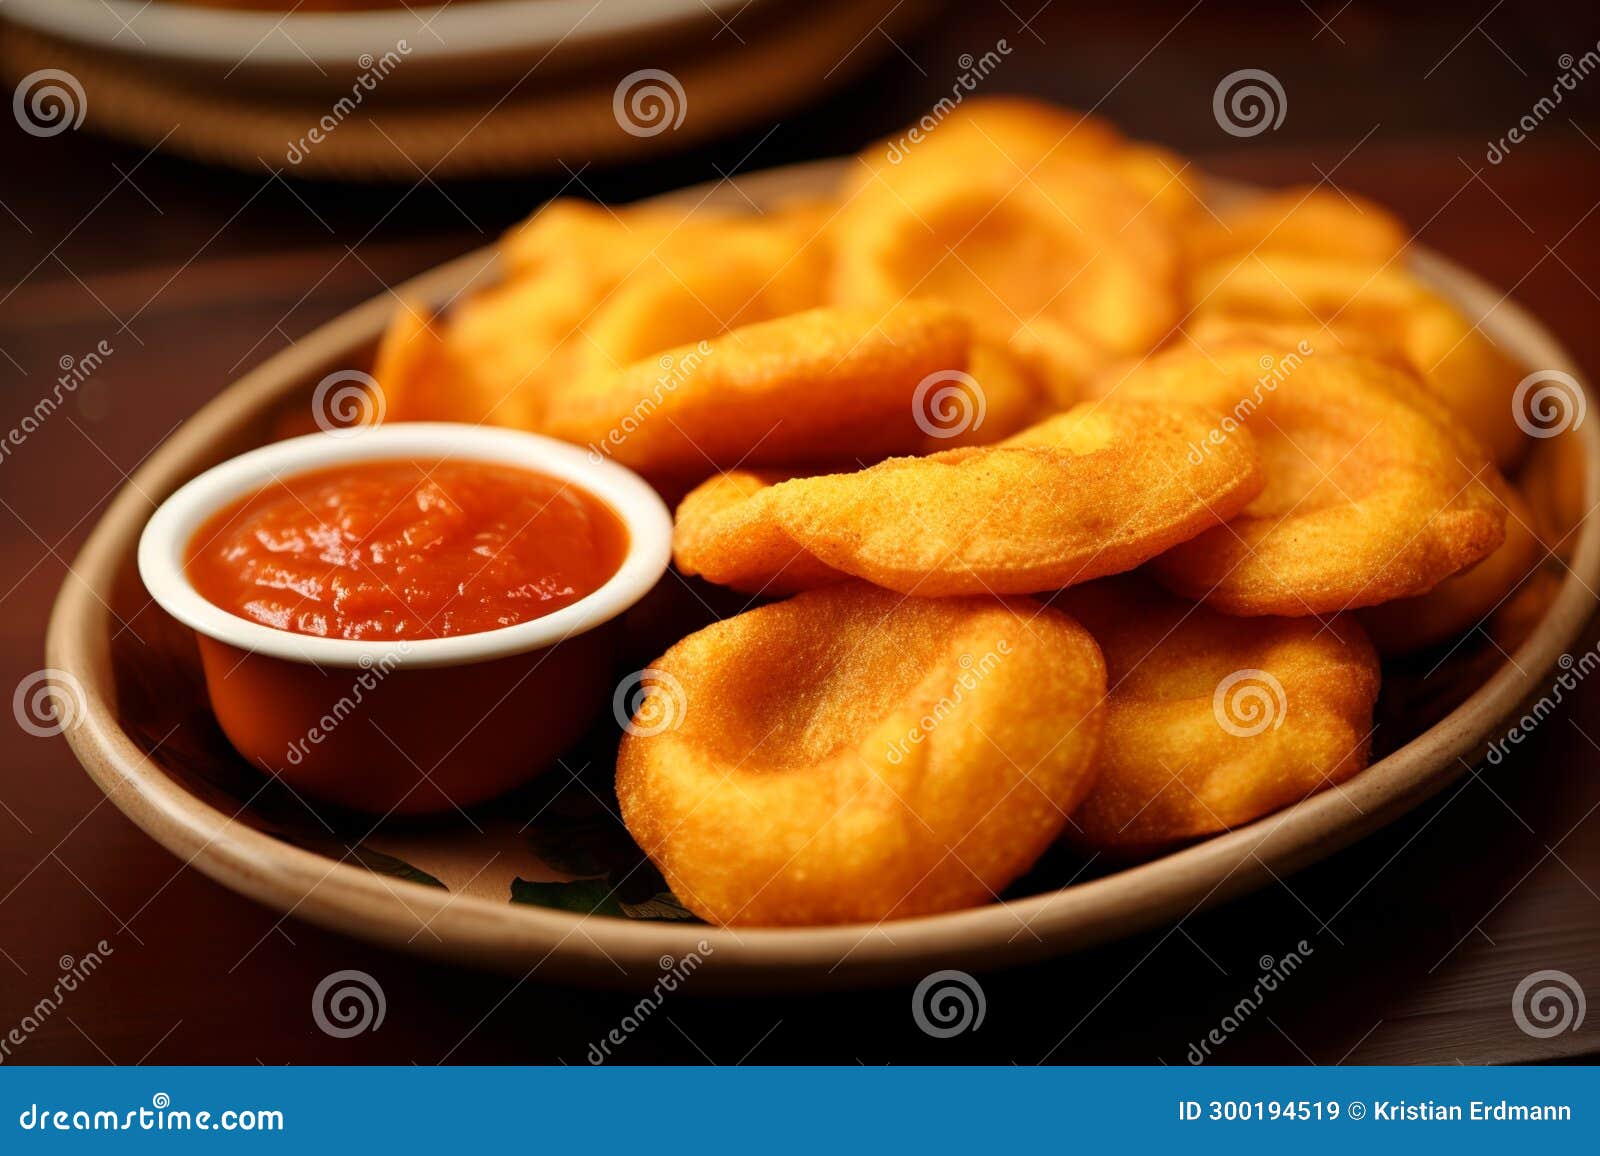 sopaipillas: pumpkin-based fried pastries with pebre sauce